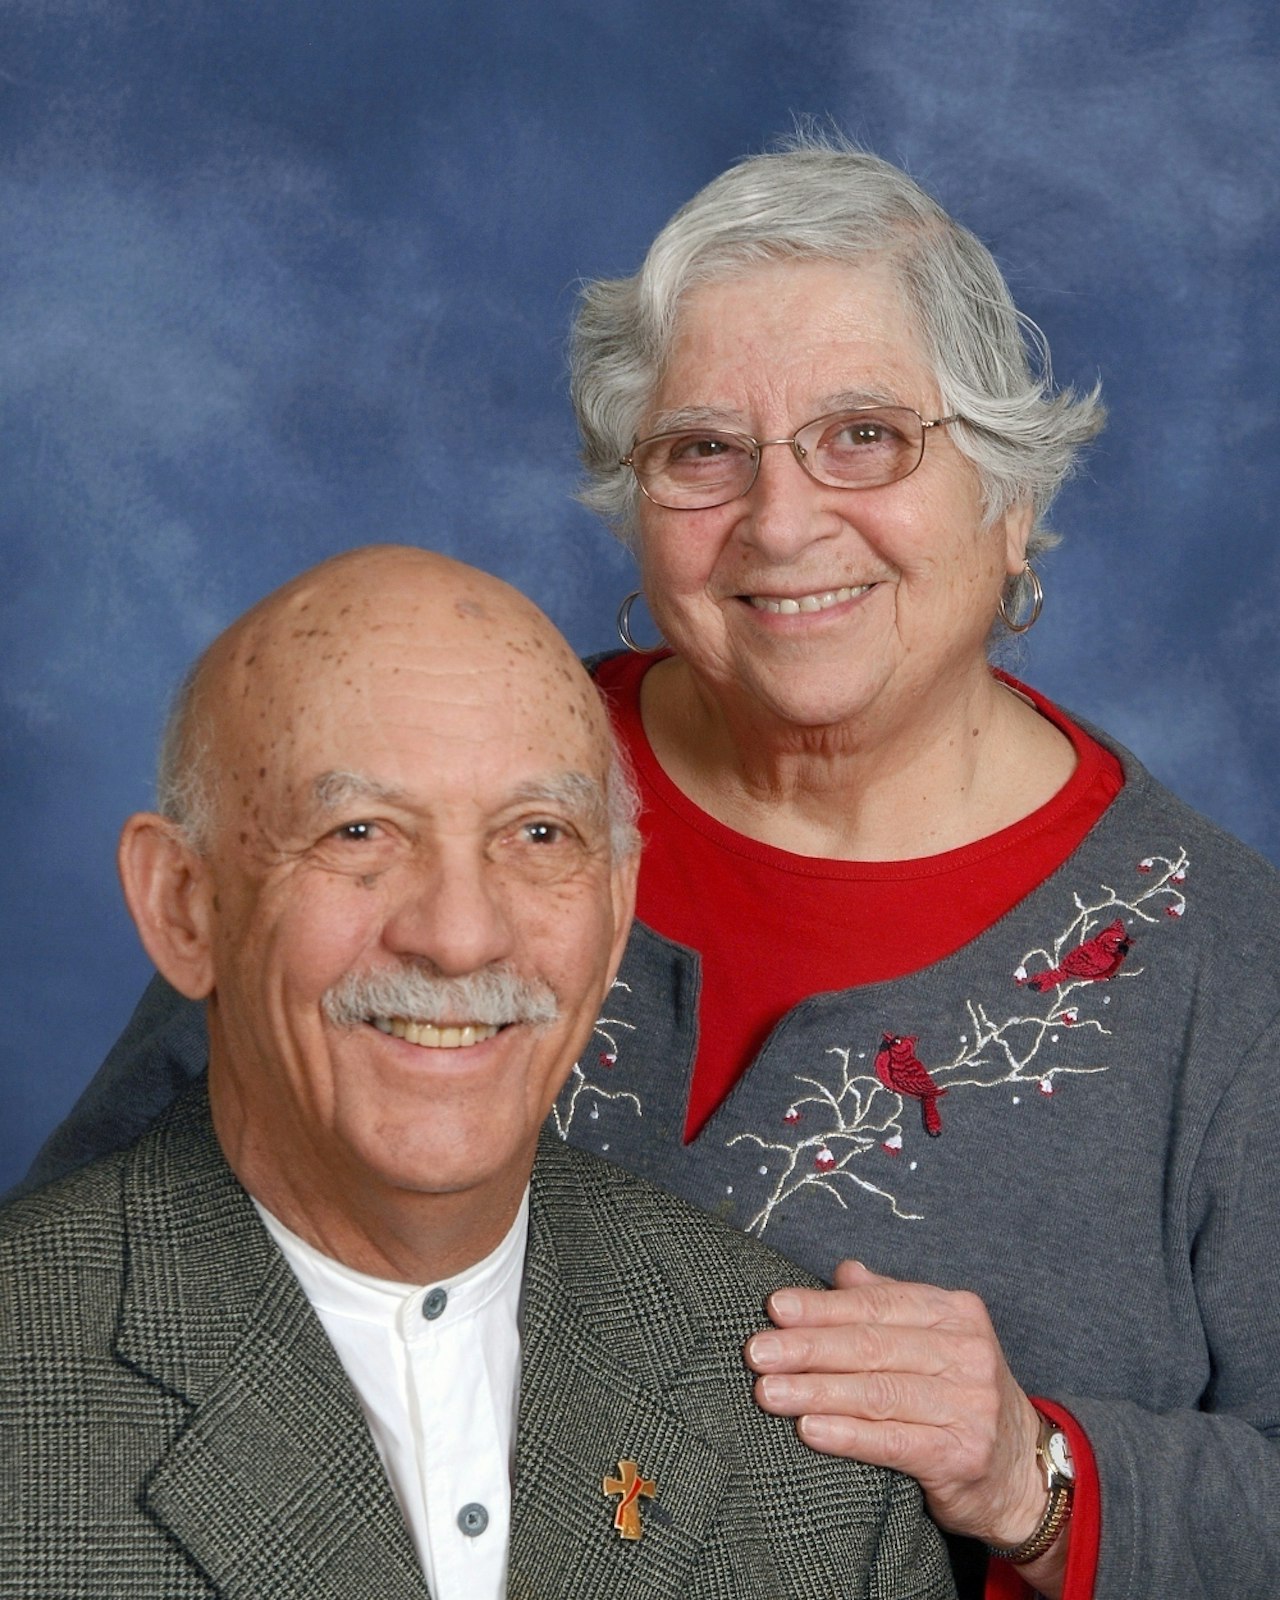 Deacon Rafael Jimenez is pictured with his wife, Margarita.